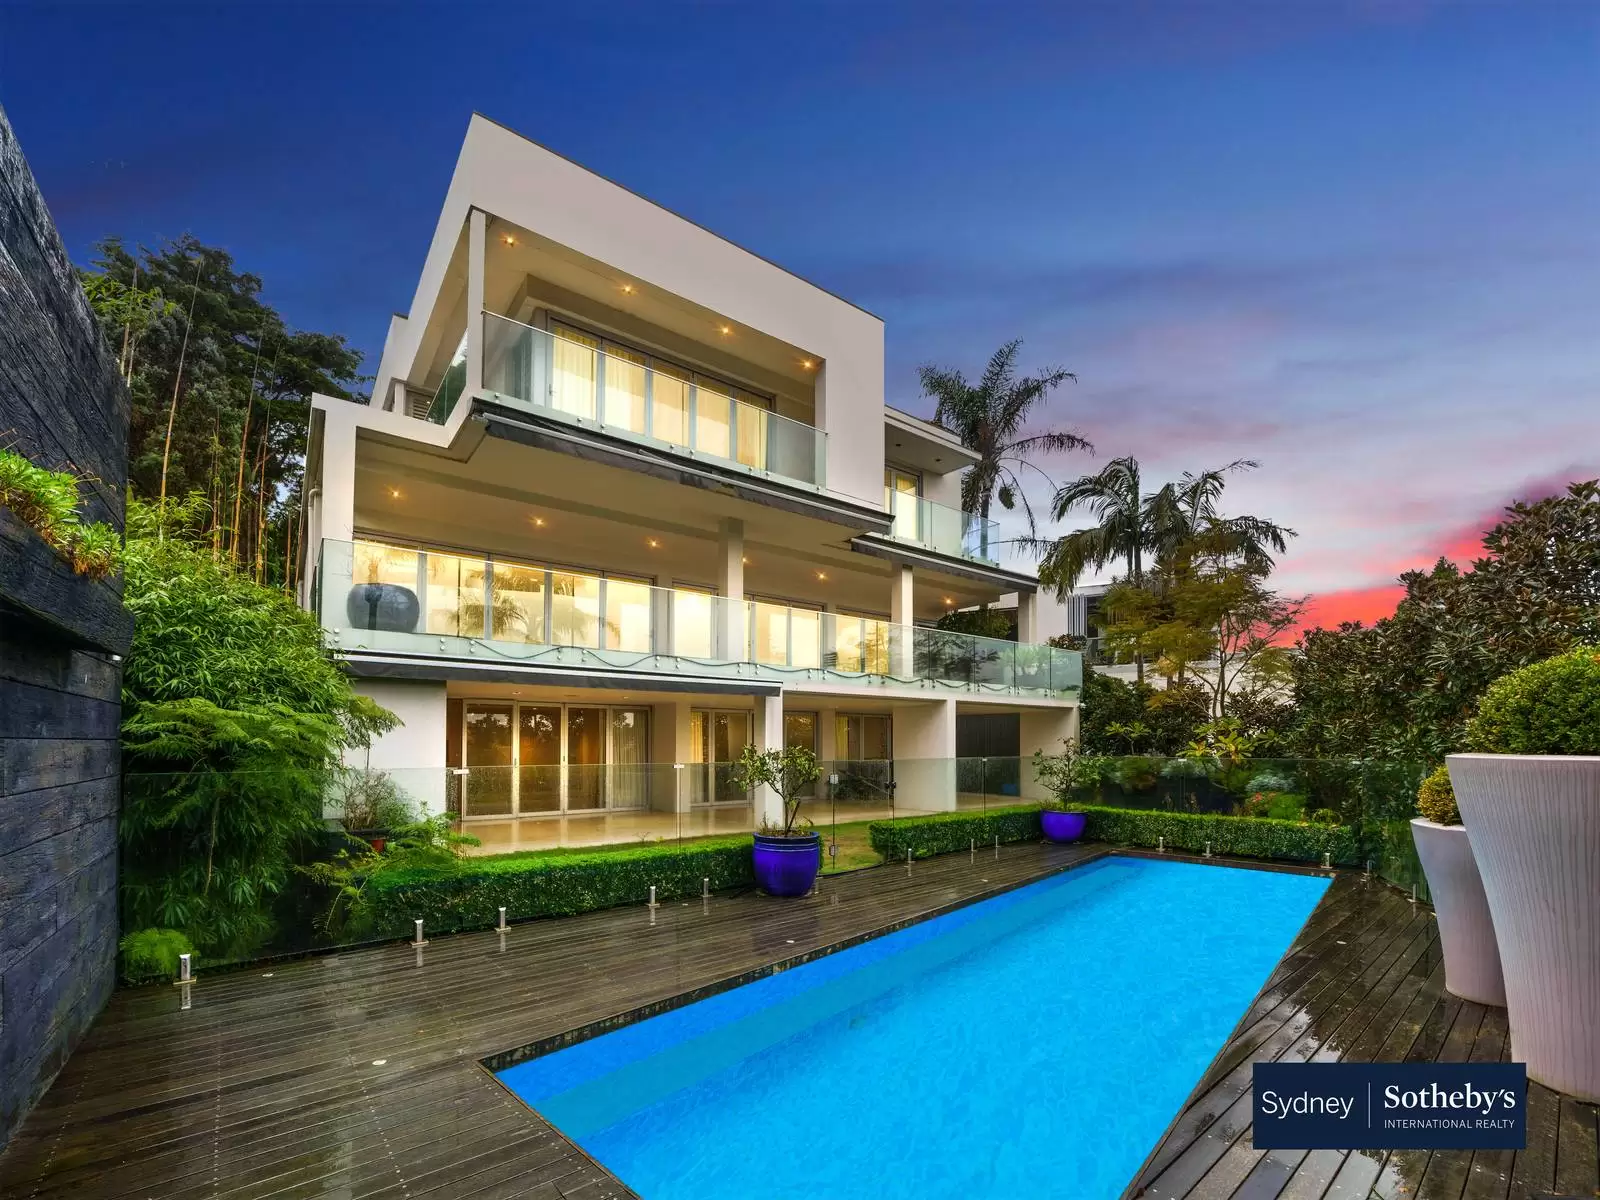 6a Bulkara Road, Bellevue Hill Leased by Sydney Sotheby's International Realty - image 1